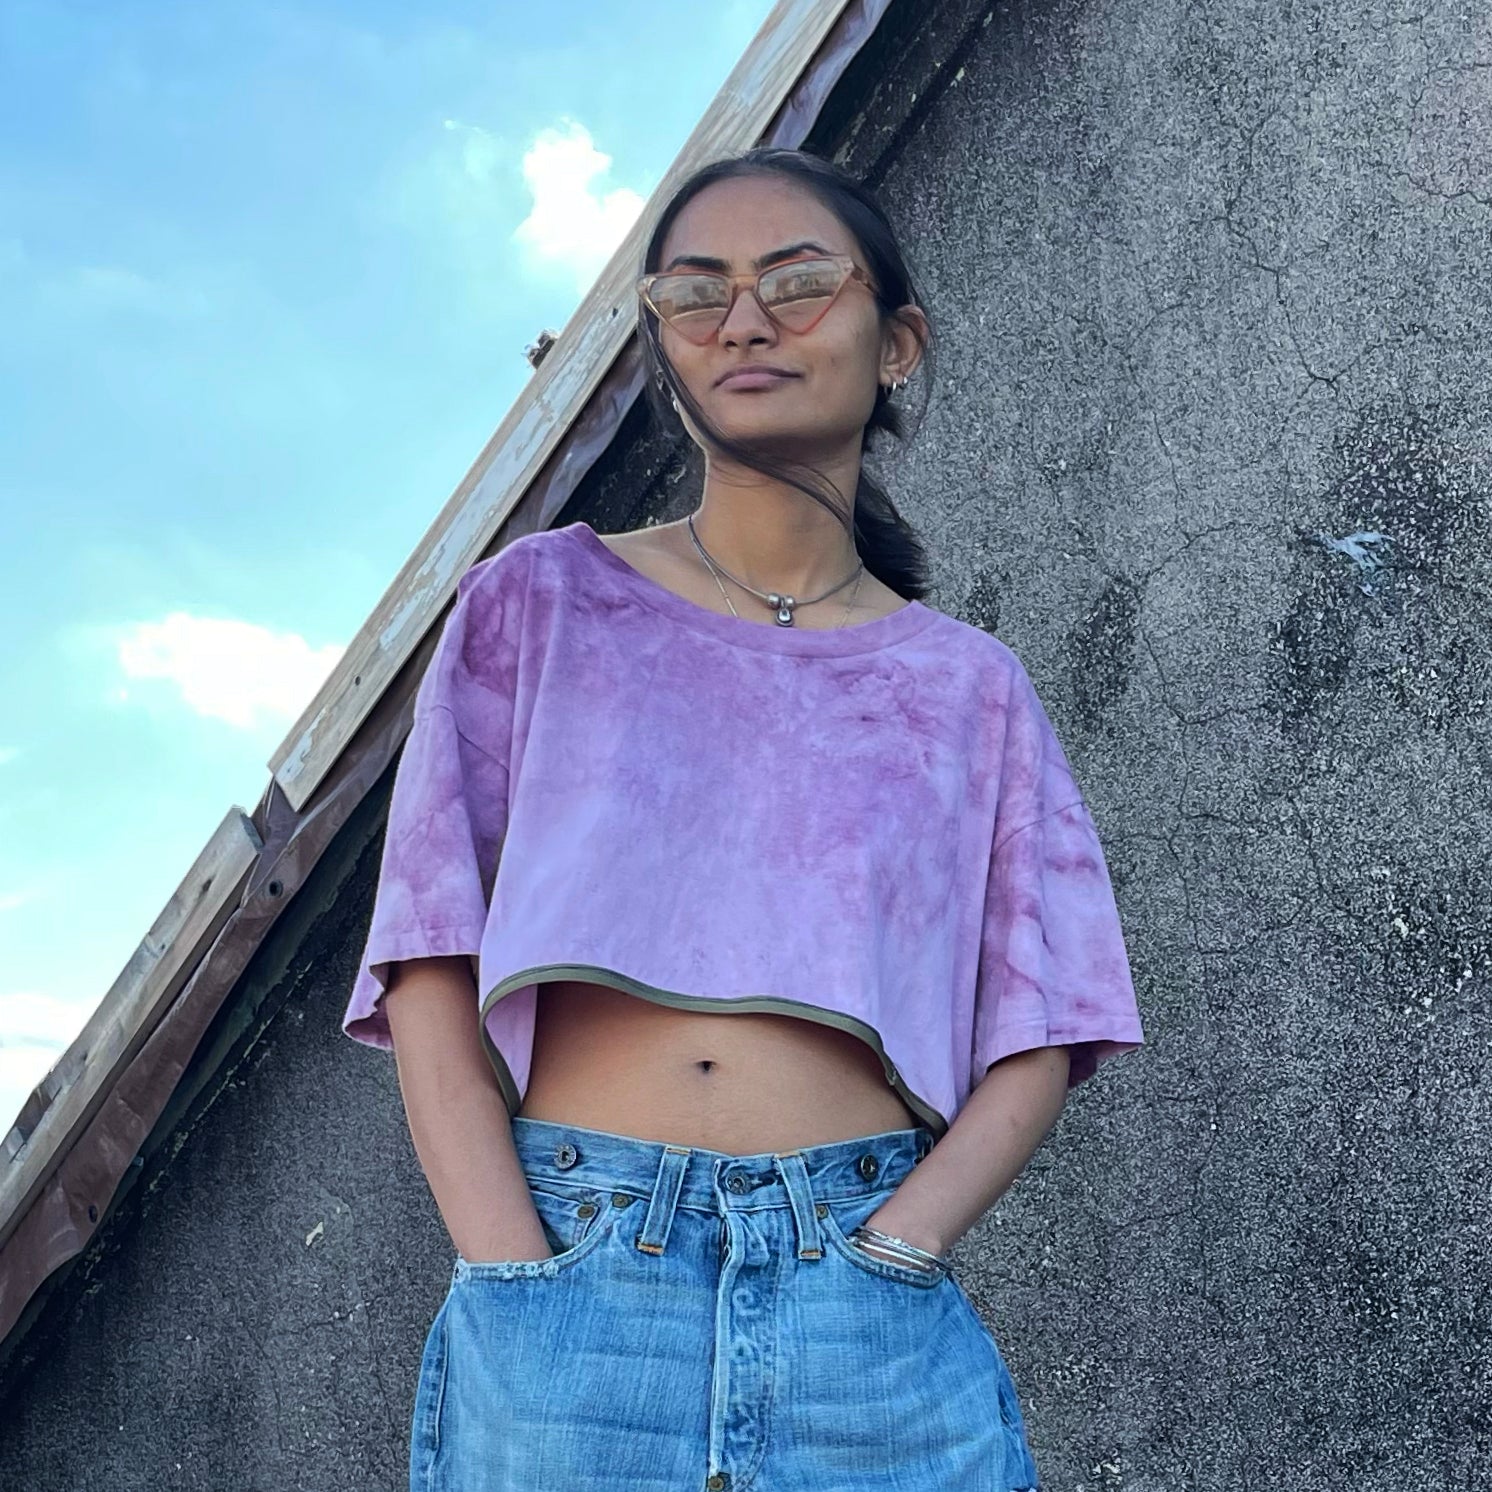 Verbena Hand Dyed Cropped Tee